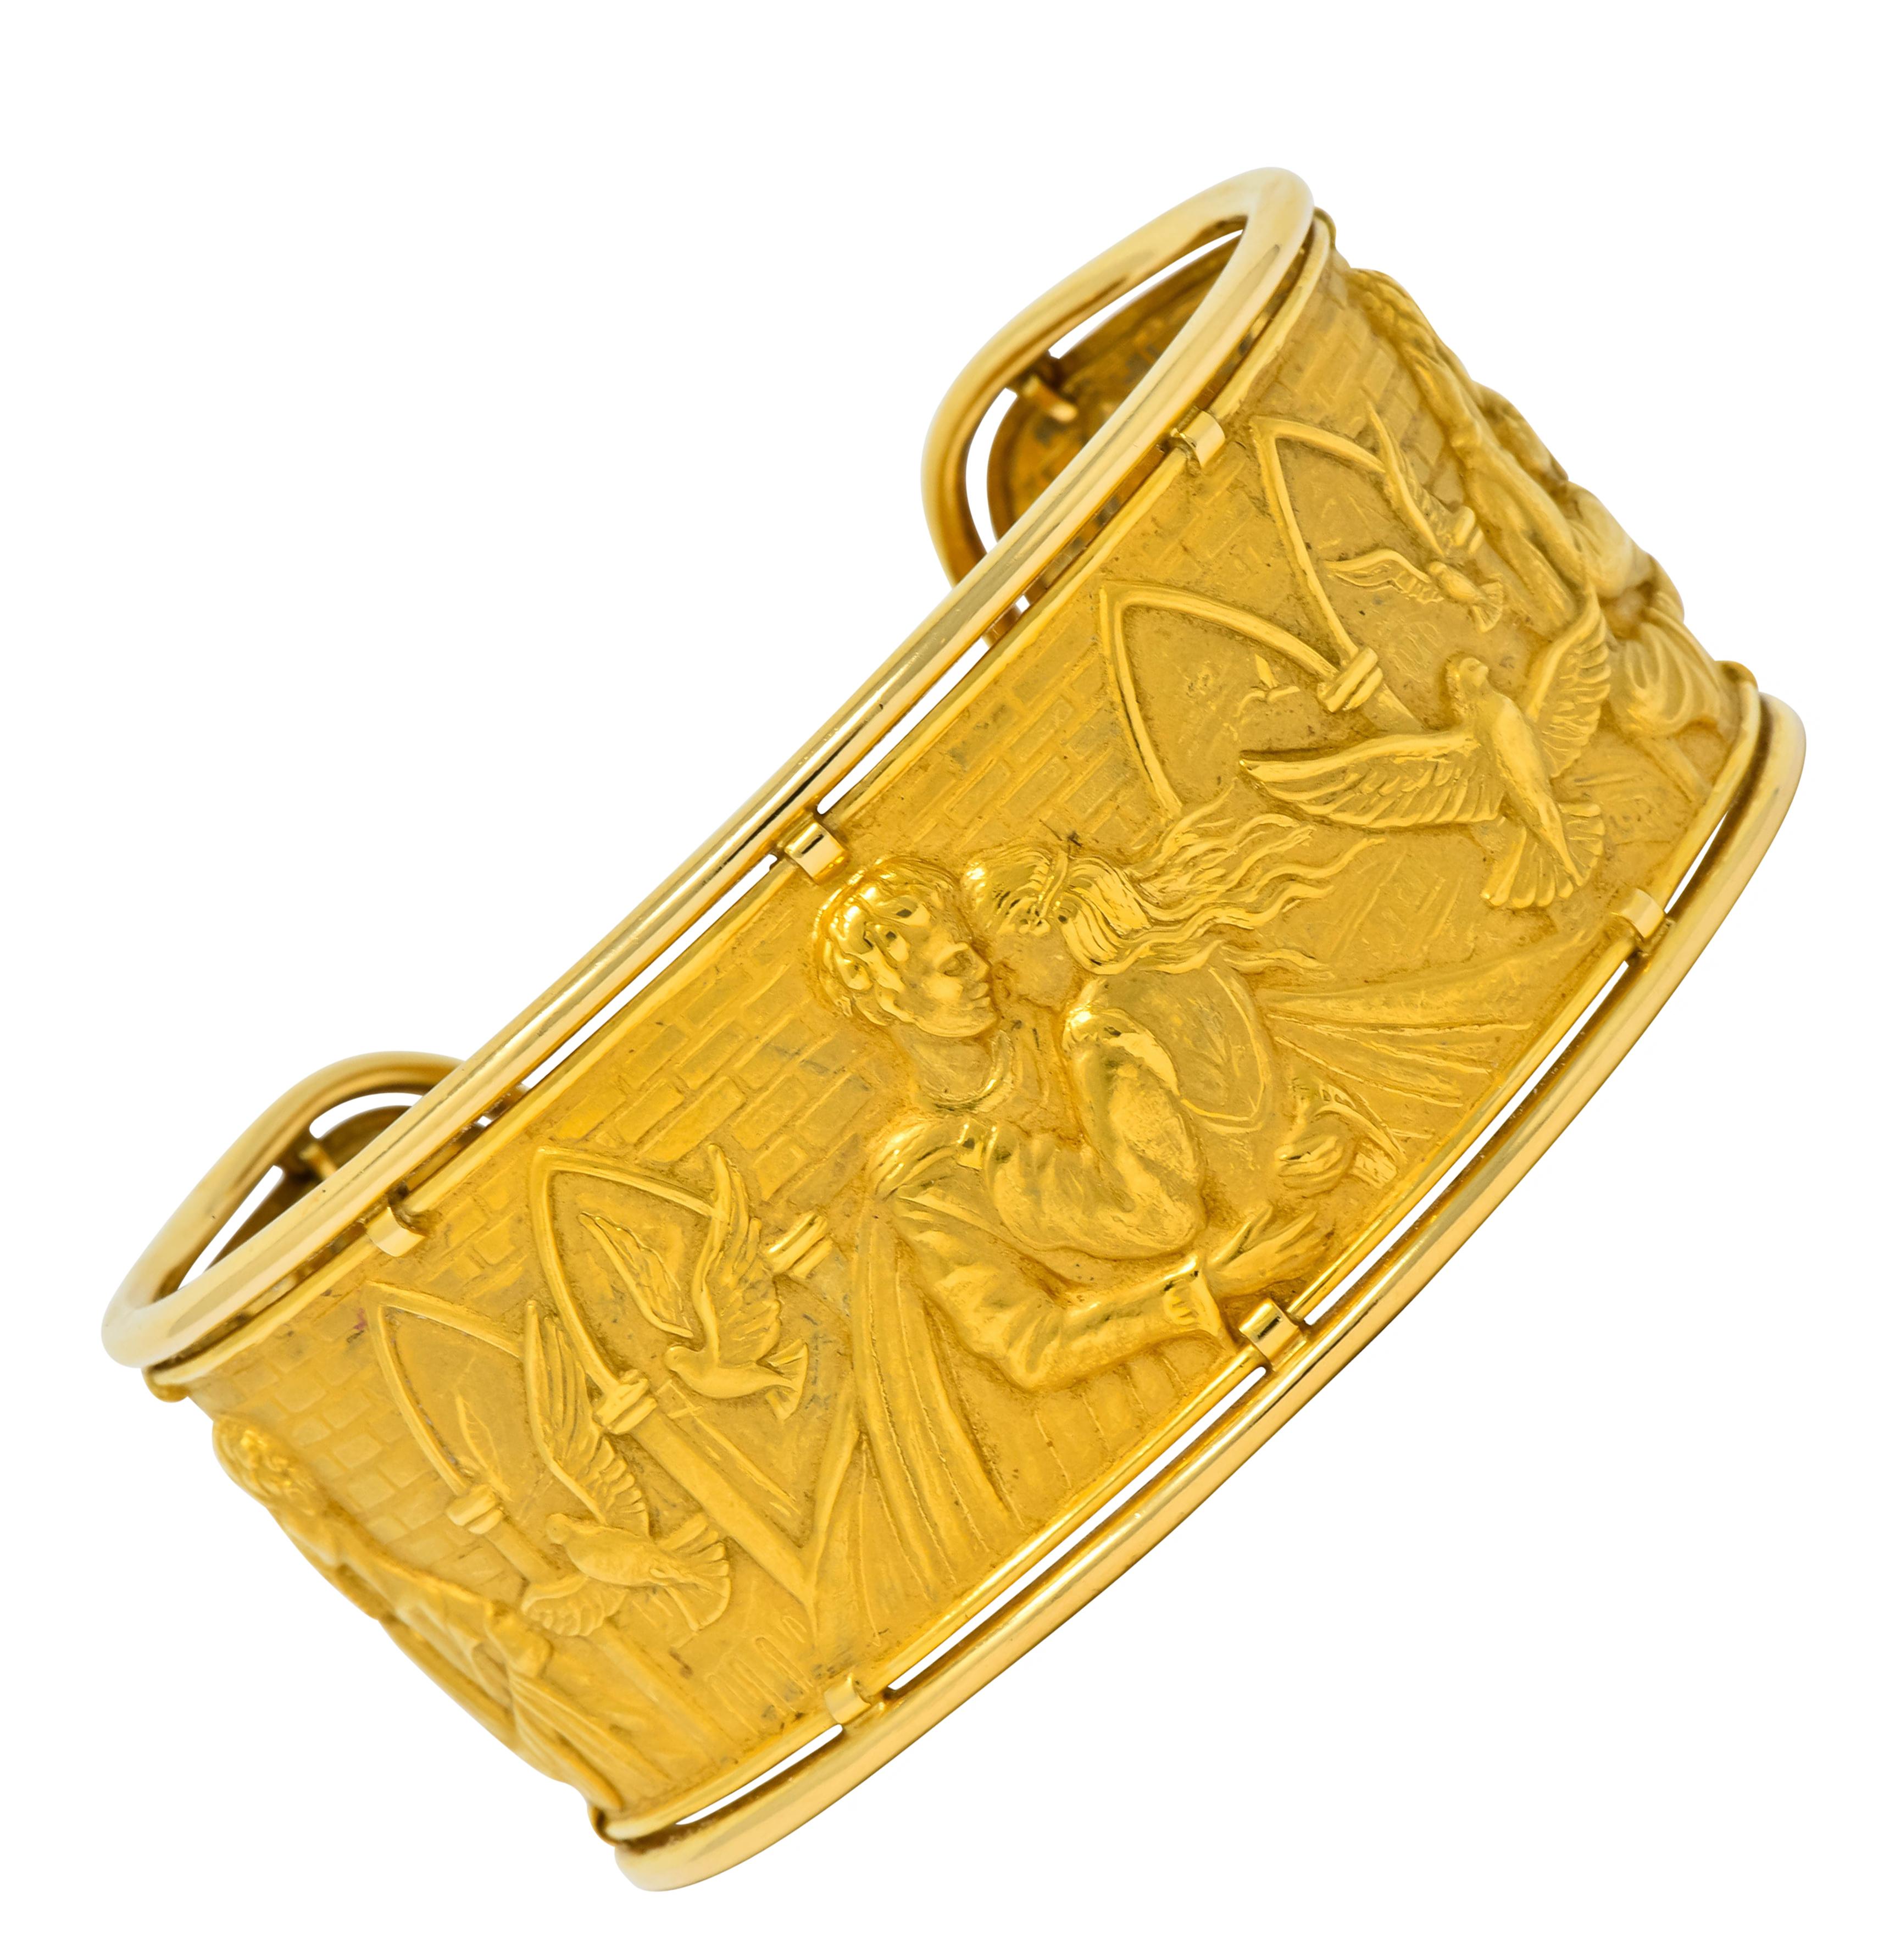 Repoussé style cuff bracelet depicting three heartwarming scenes of Romeo & Juliet embracing

Matte gold background is a highly rendered image of the medieval Italian city of Verona accented by soaring birds and brick motif

Surrounded by polished